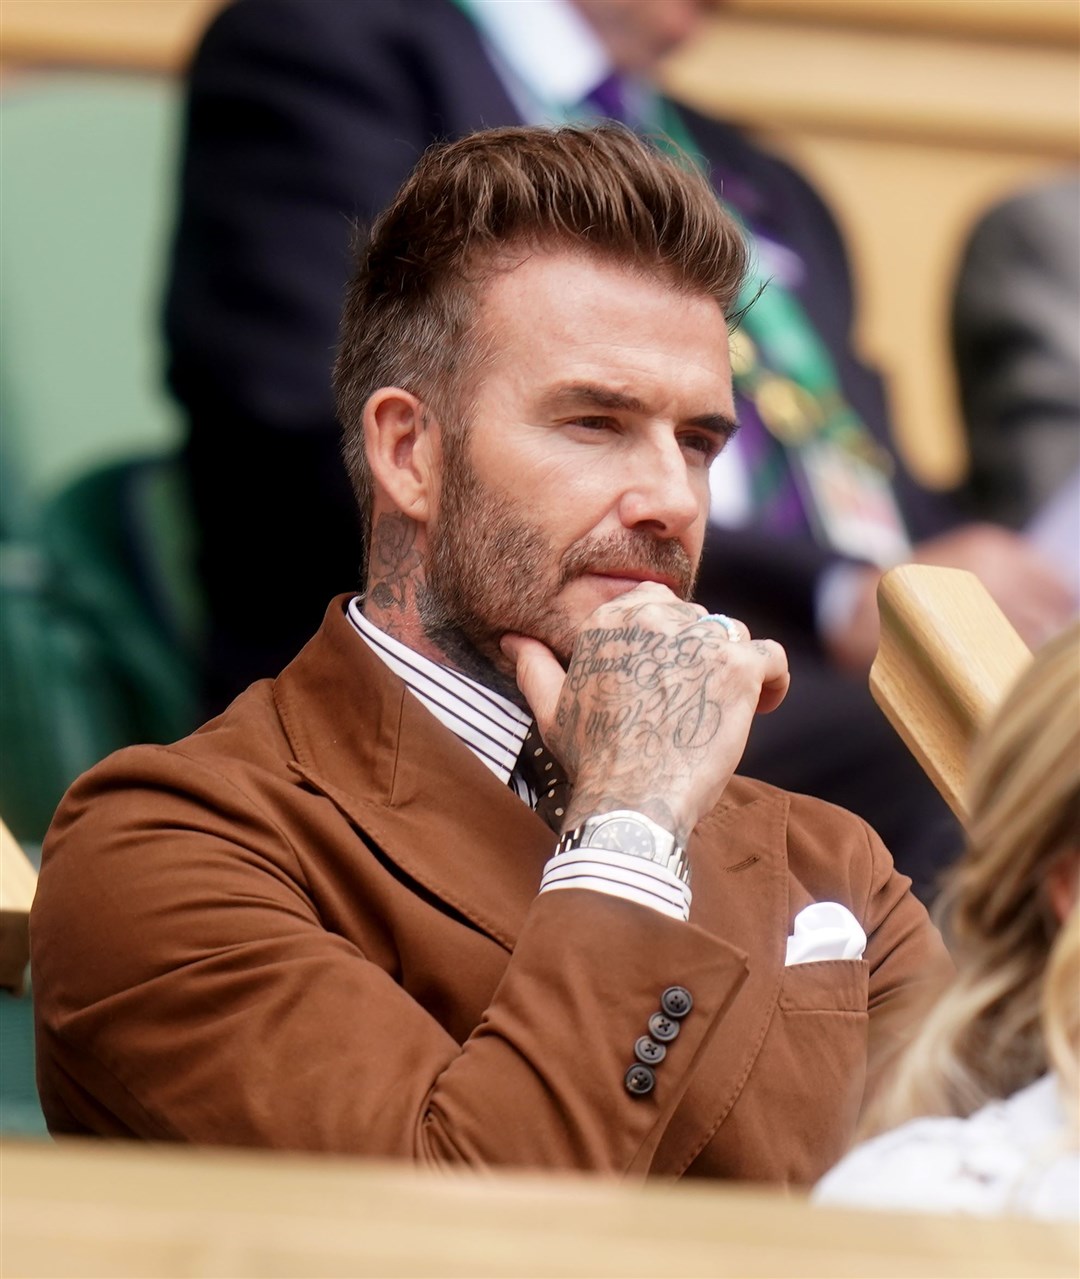 David Beckham is yet to publicly acknowledge or respond to the ultimatum (Adam Davy/PA)